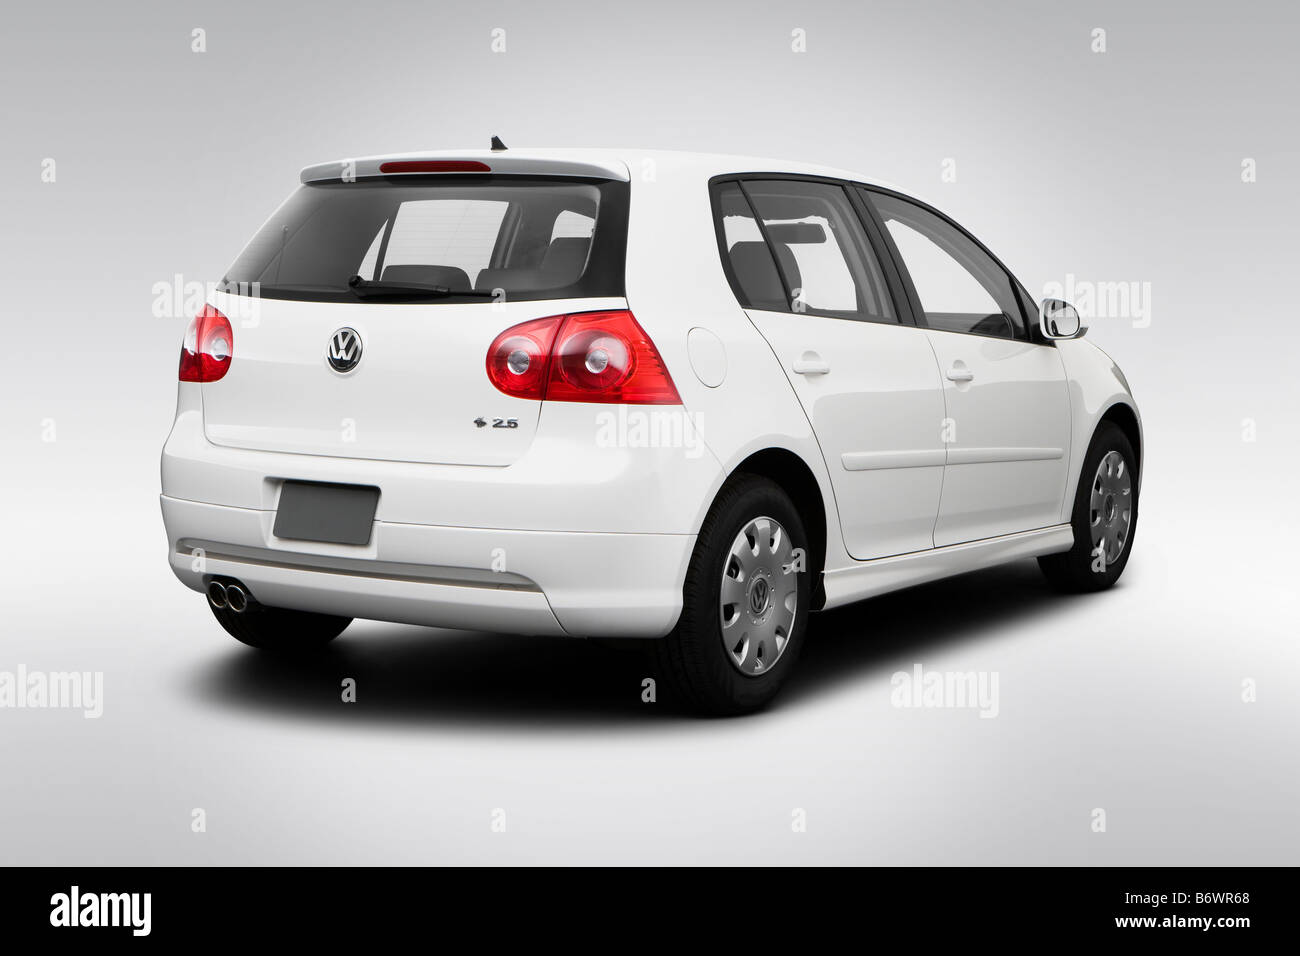 2009 Volkswagen Rabbit S in White - Rear angle view Stock Photo